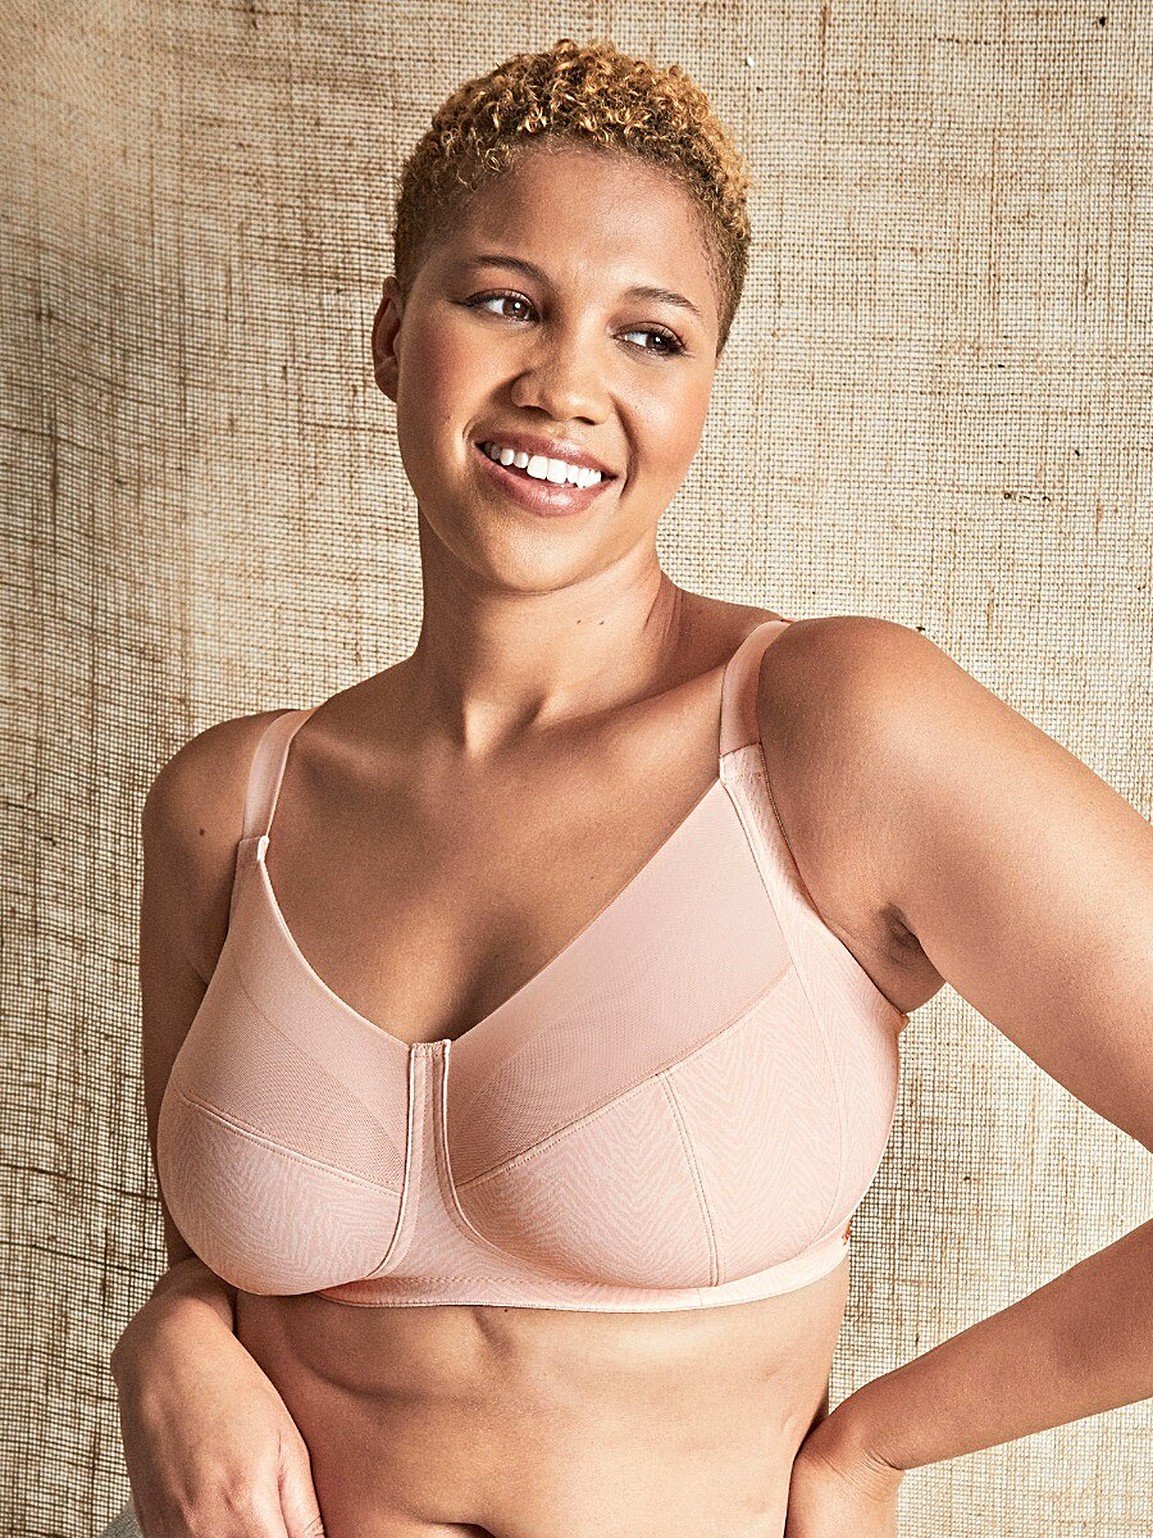 Fit Fully Yours Elise Moulded T-Shirt Underwire Bra - Style B1812